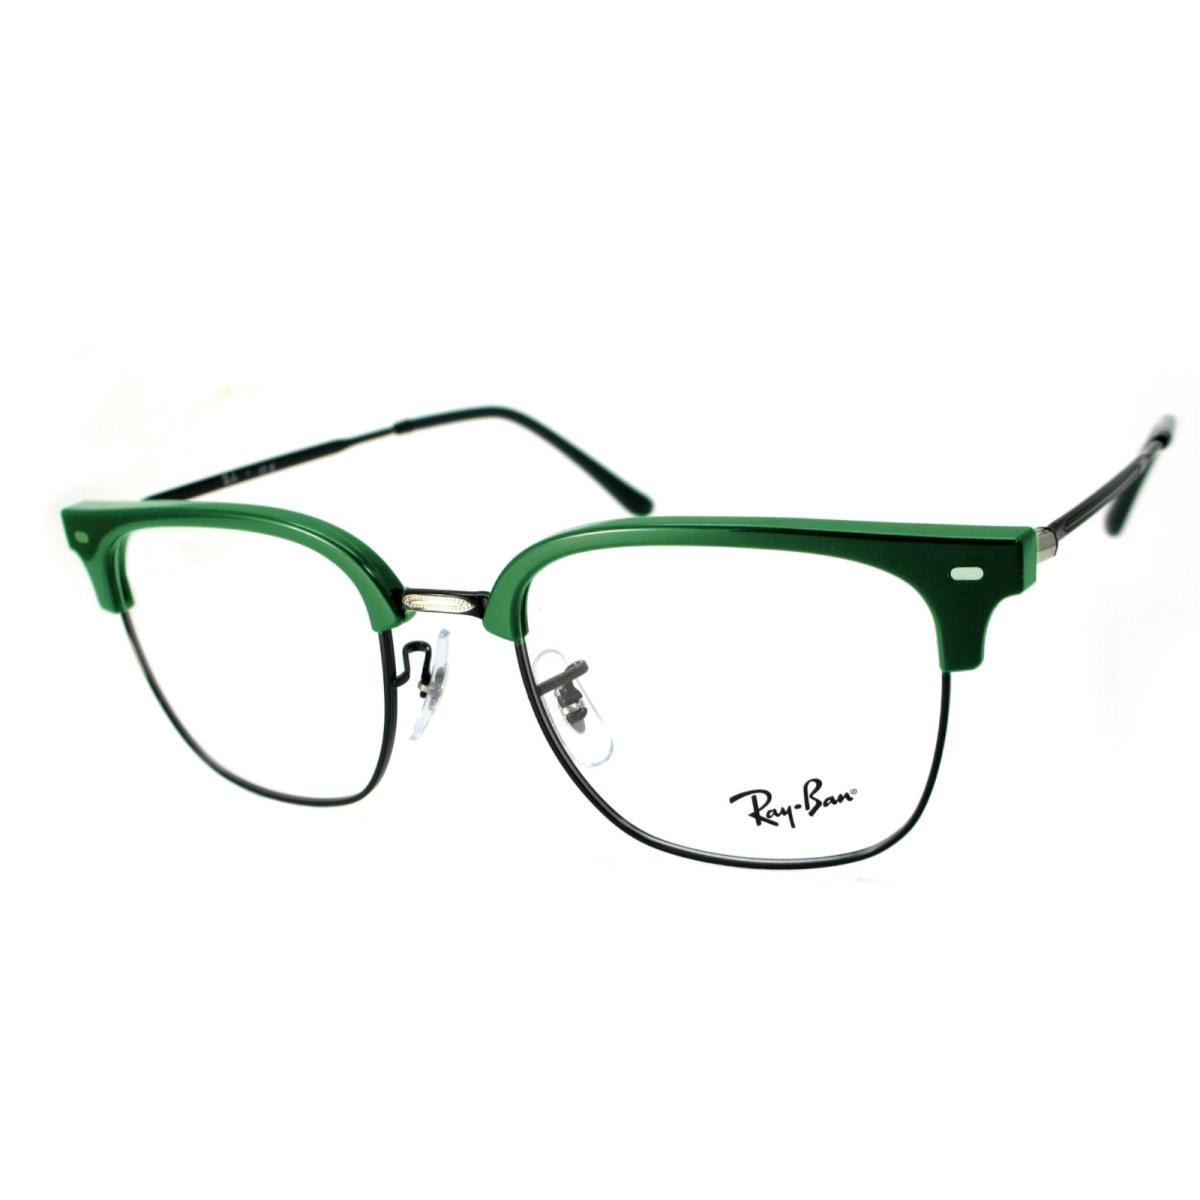 Ray-ban Clubmaster Reading Glasses RB 7216 8208 51 Black Green Frame Readers - Black & Green, Frame: Black & Green, Lens: